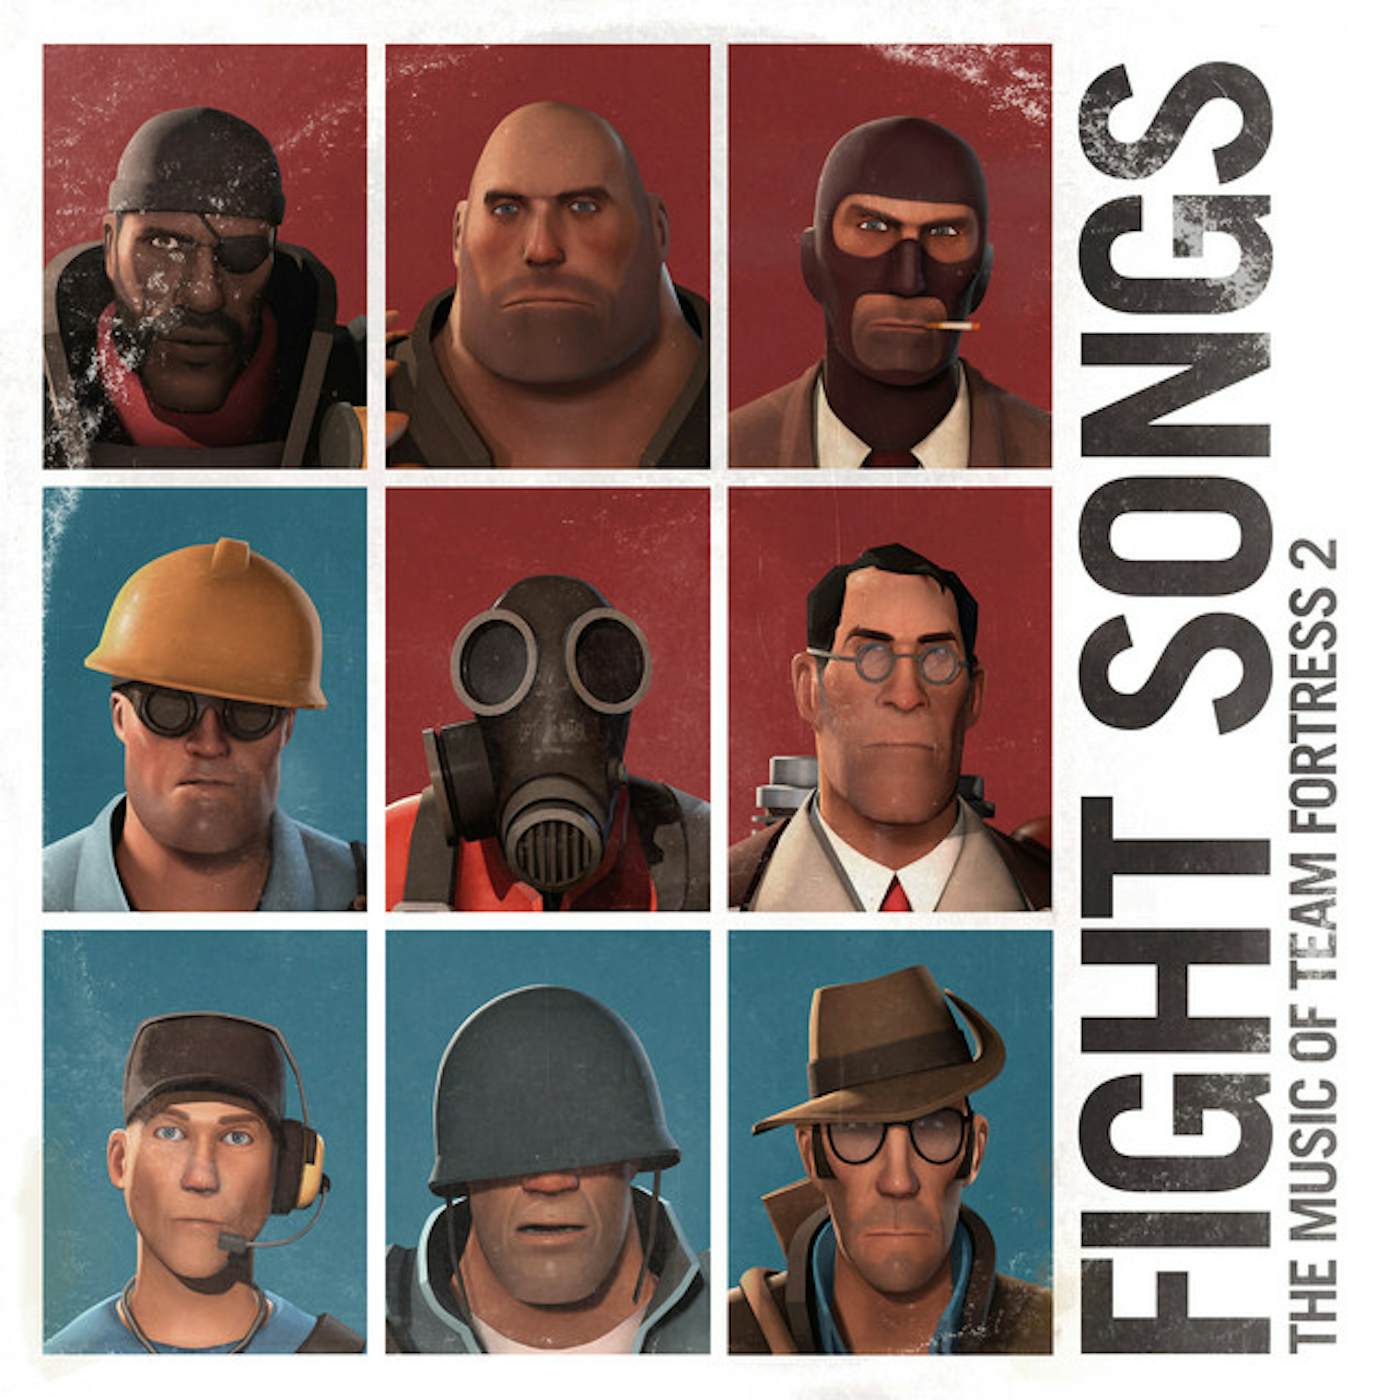 Valve Studio Orchestra FIGHT SONGS: THE MUSIC OF TEAM FORTRESS 2 (GATEFOLD/POSTER/GAME CARD/COLORED VINYL) Vinyl Record